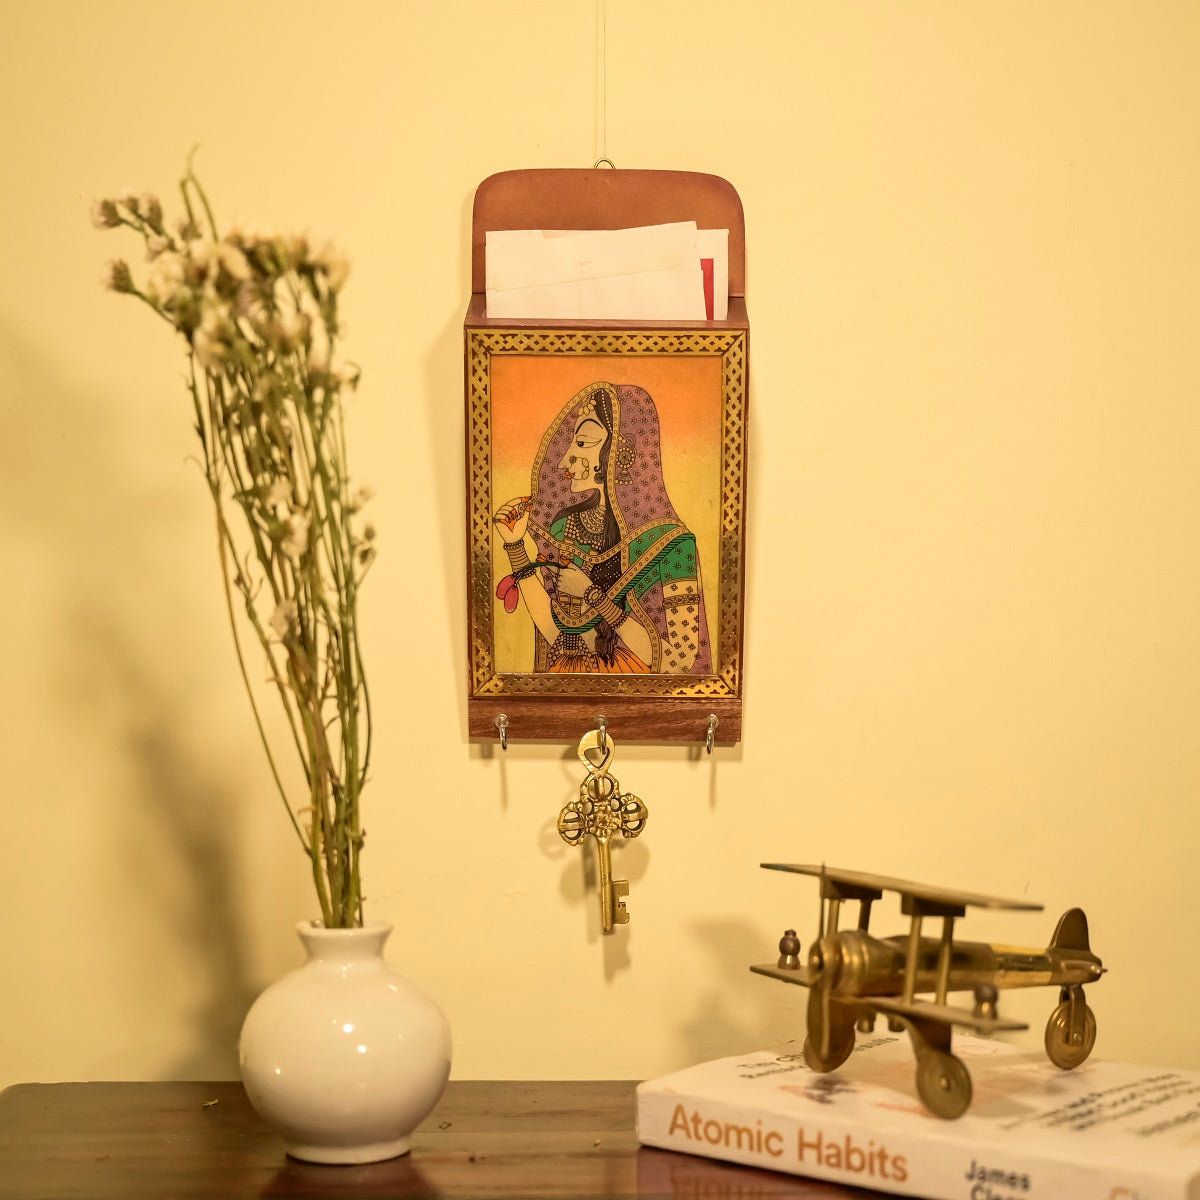 Multipurpose Traditional Rajasthani Painting Wooden Letterhead and Key Holder